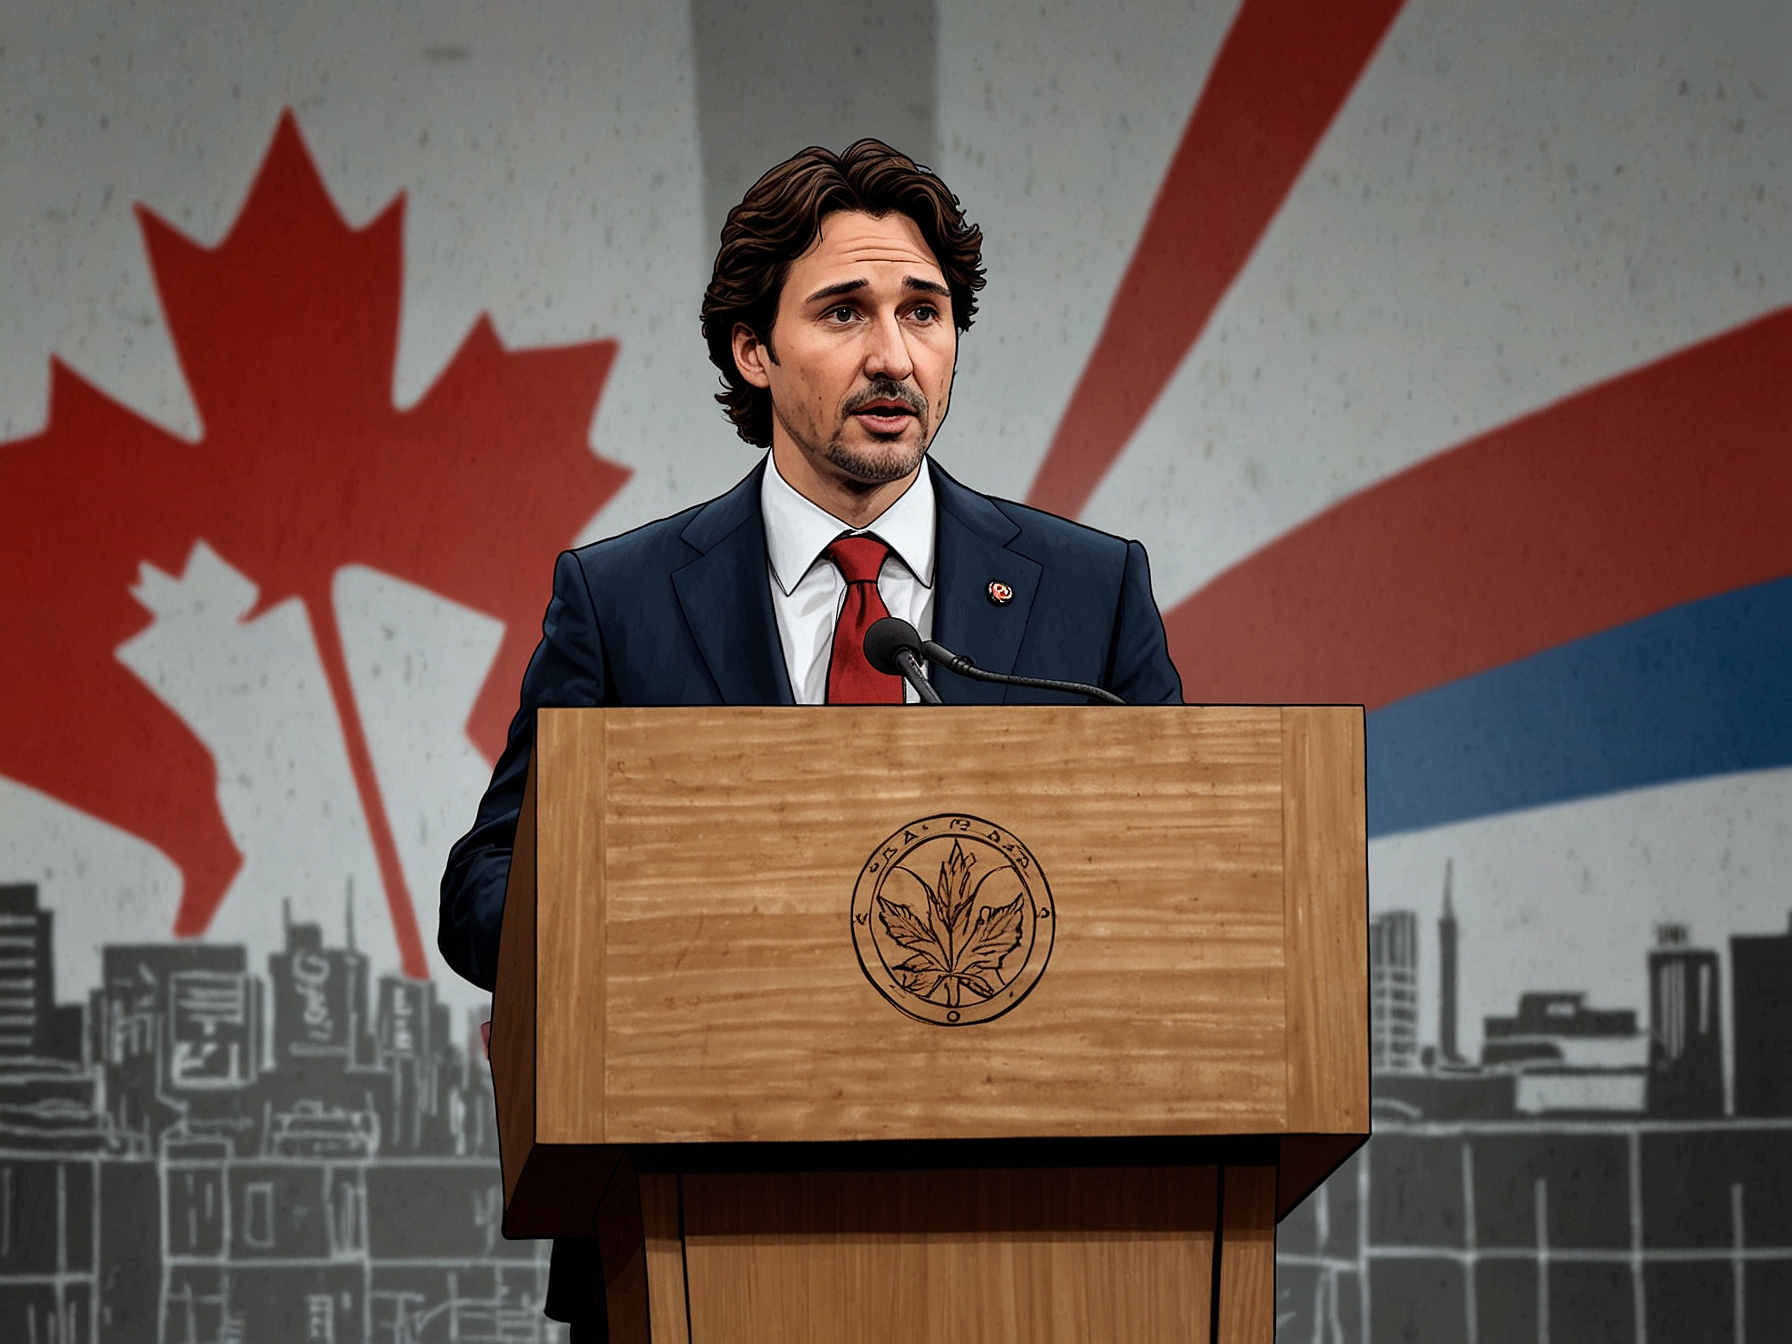 Prime Minister Justin Trudeau speaks at a podium, expressing his condolences and paying tribute to Donald Sutherland, highlighting the late actor's immense contributions to Canadian culture and the film industry.